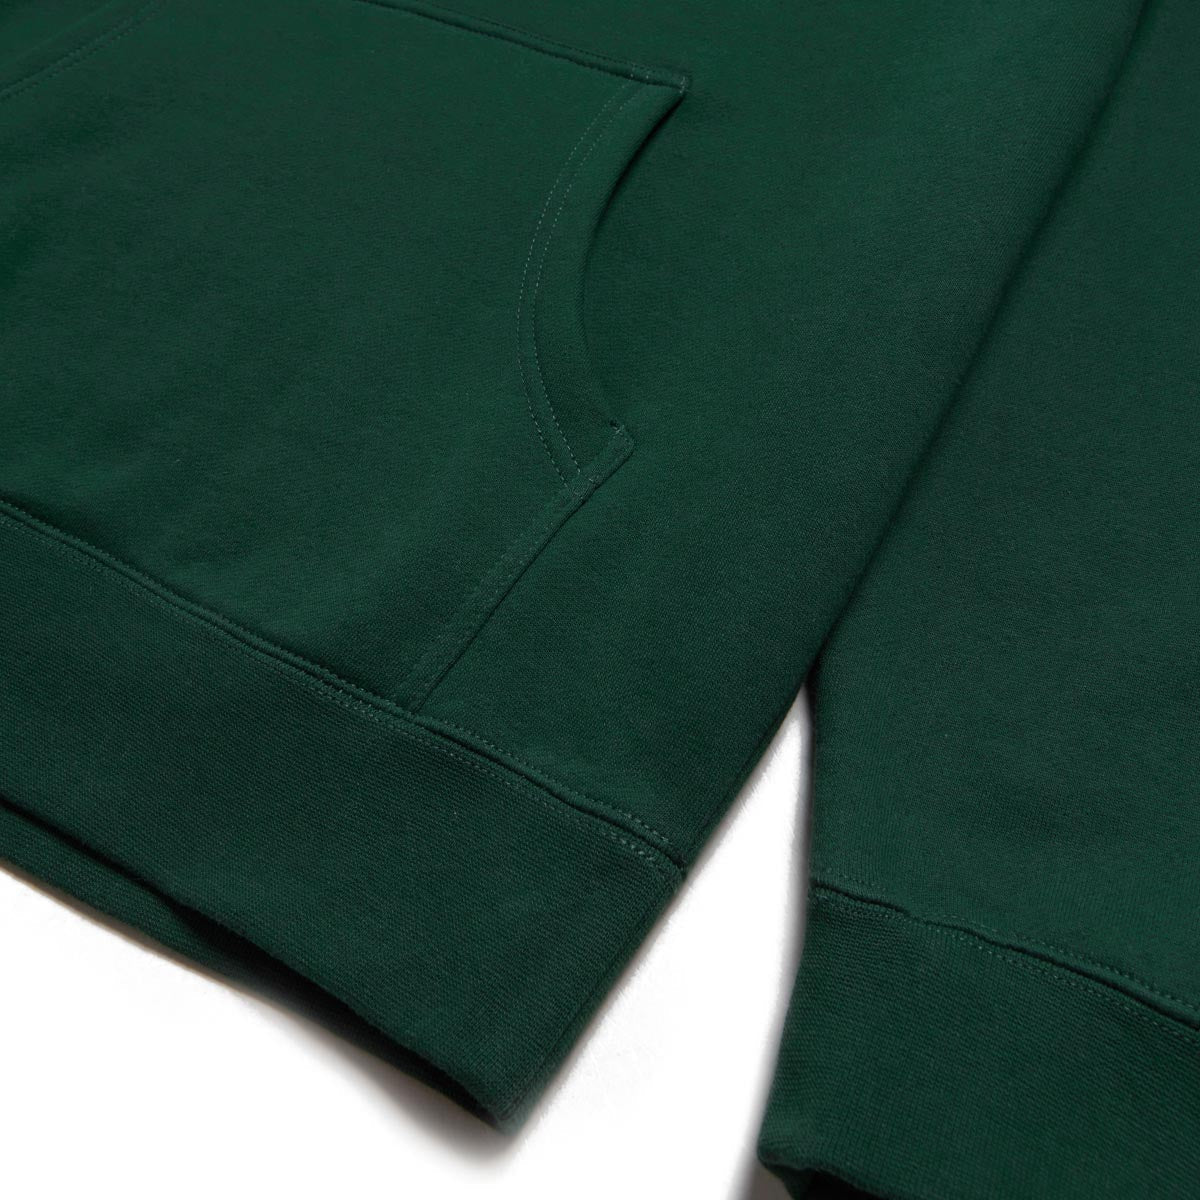 CCS Staple Pullover Hoodie - Green image 3